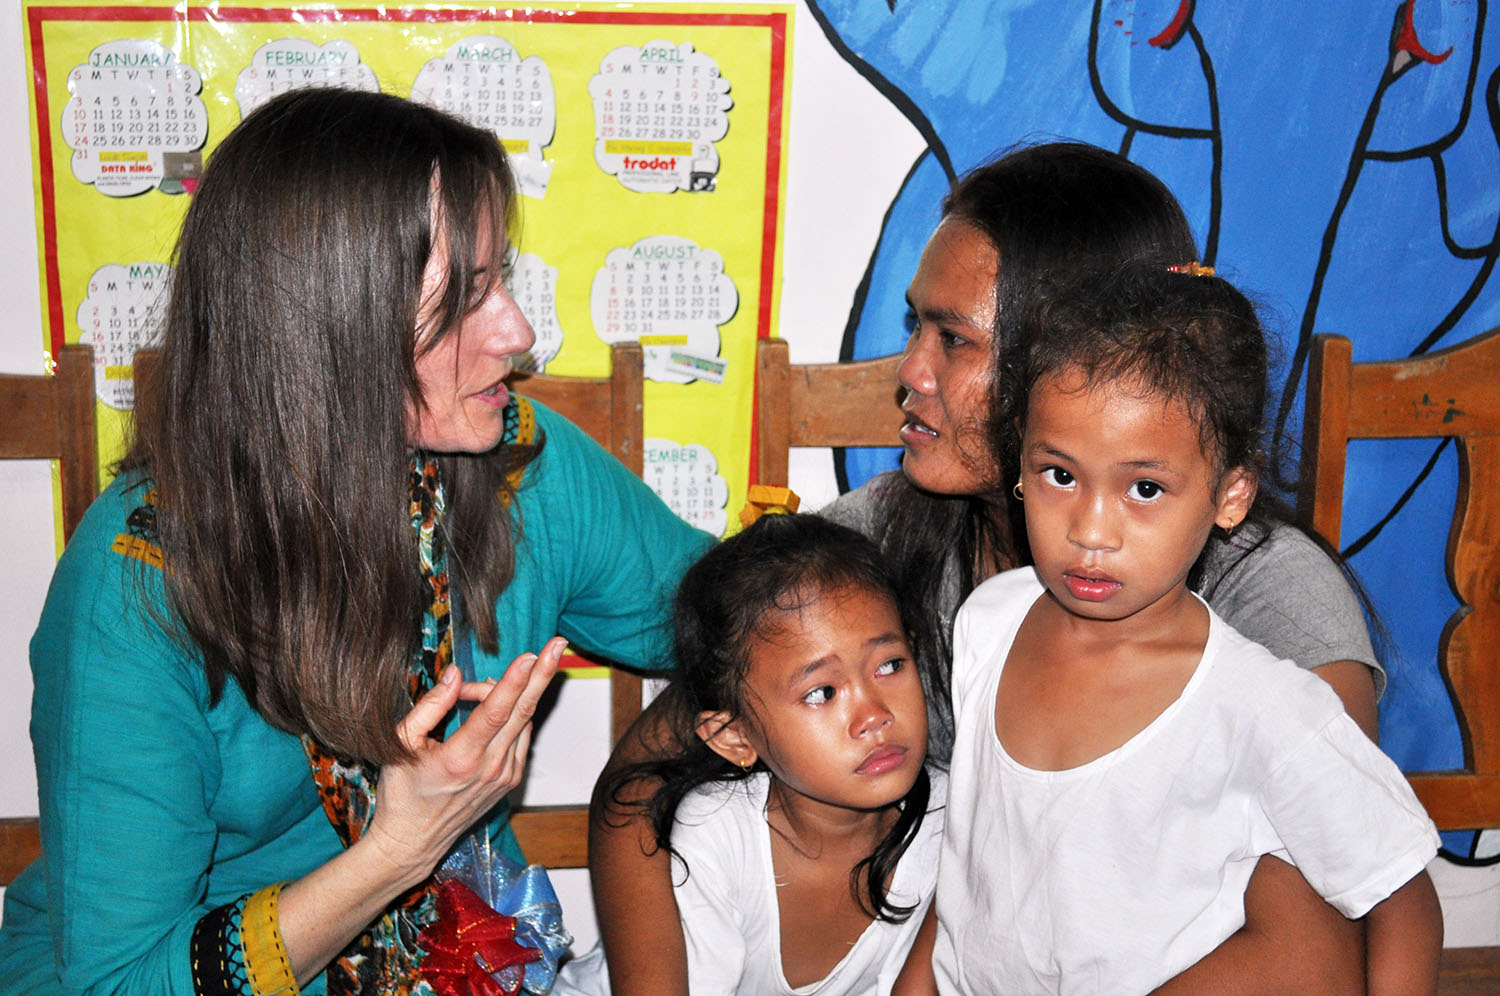 Gudrun Margret Pallsdottir, from Iceland, chairman of ABC International, visiting families in the Philippines